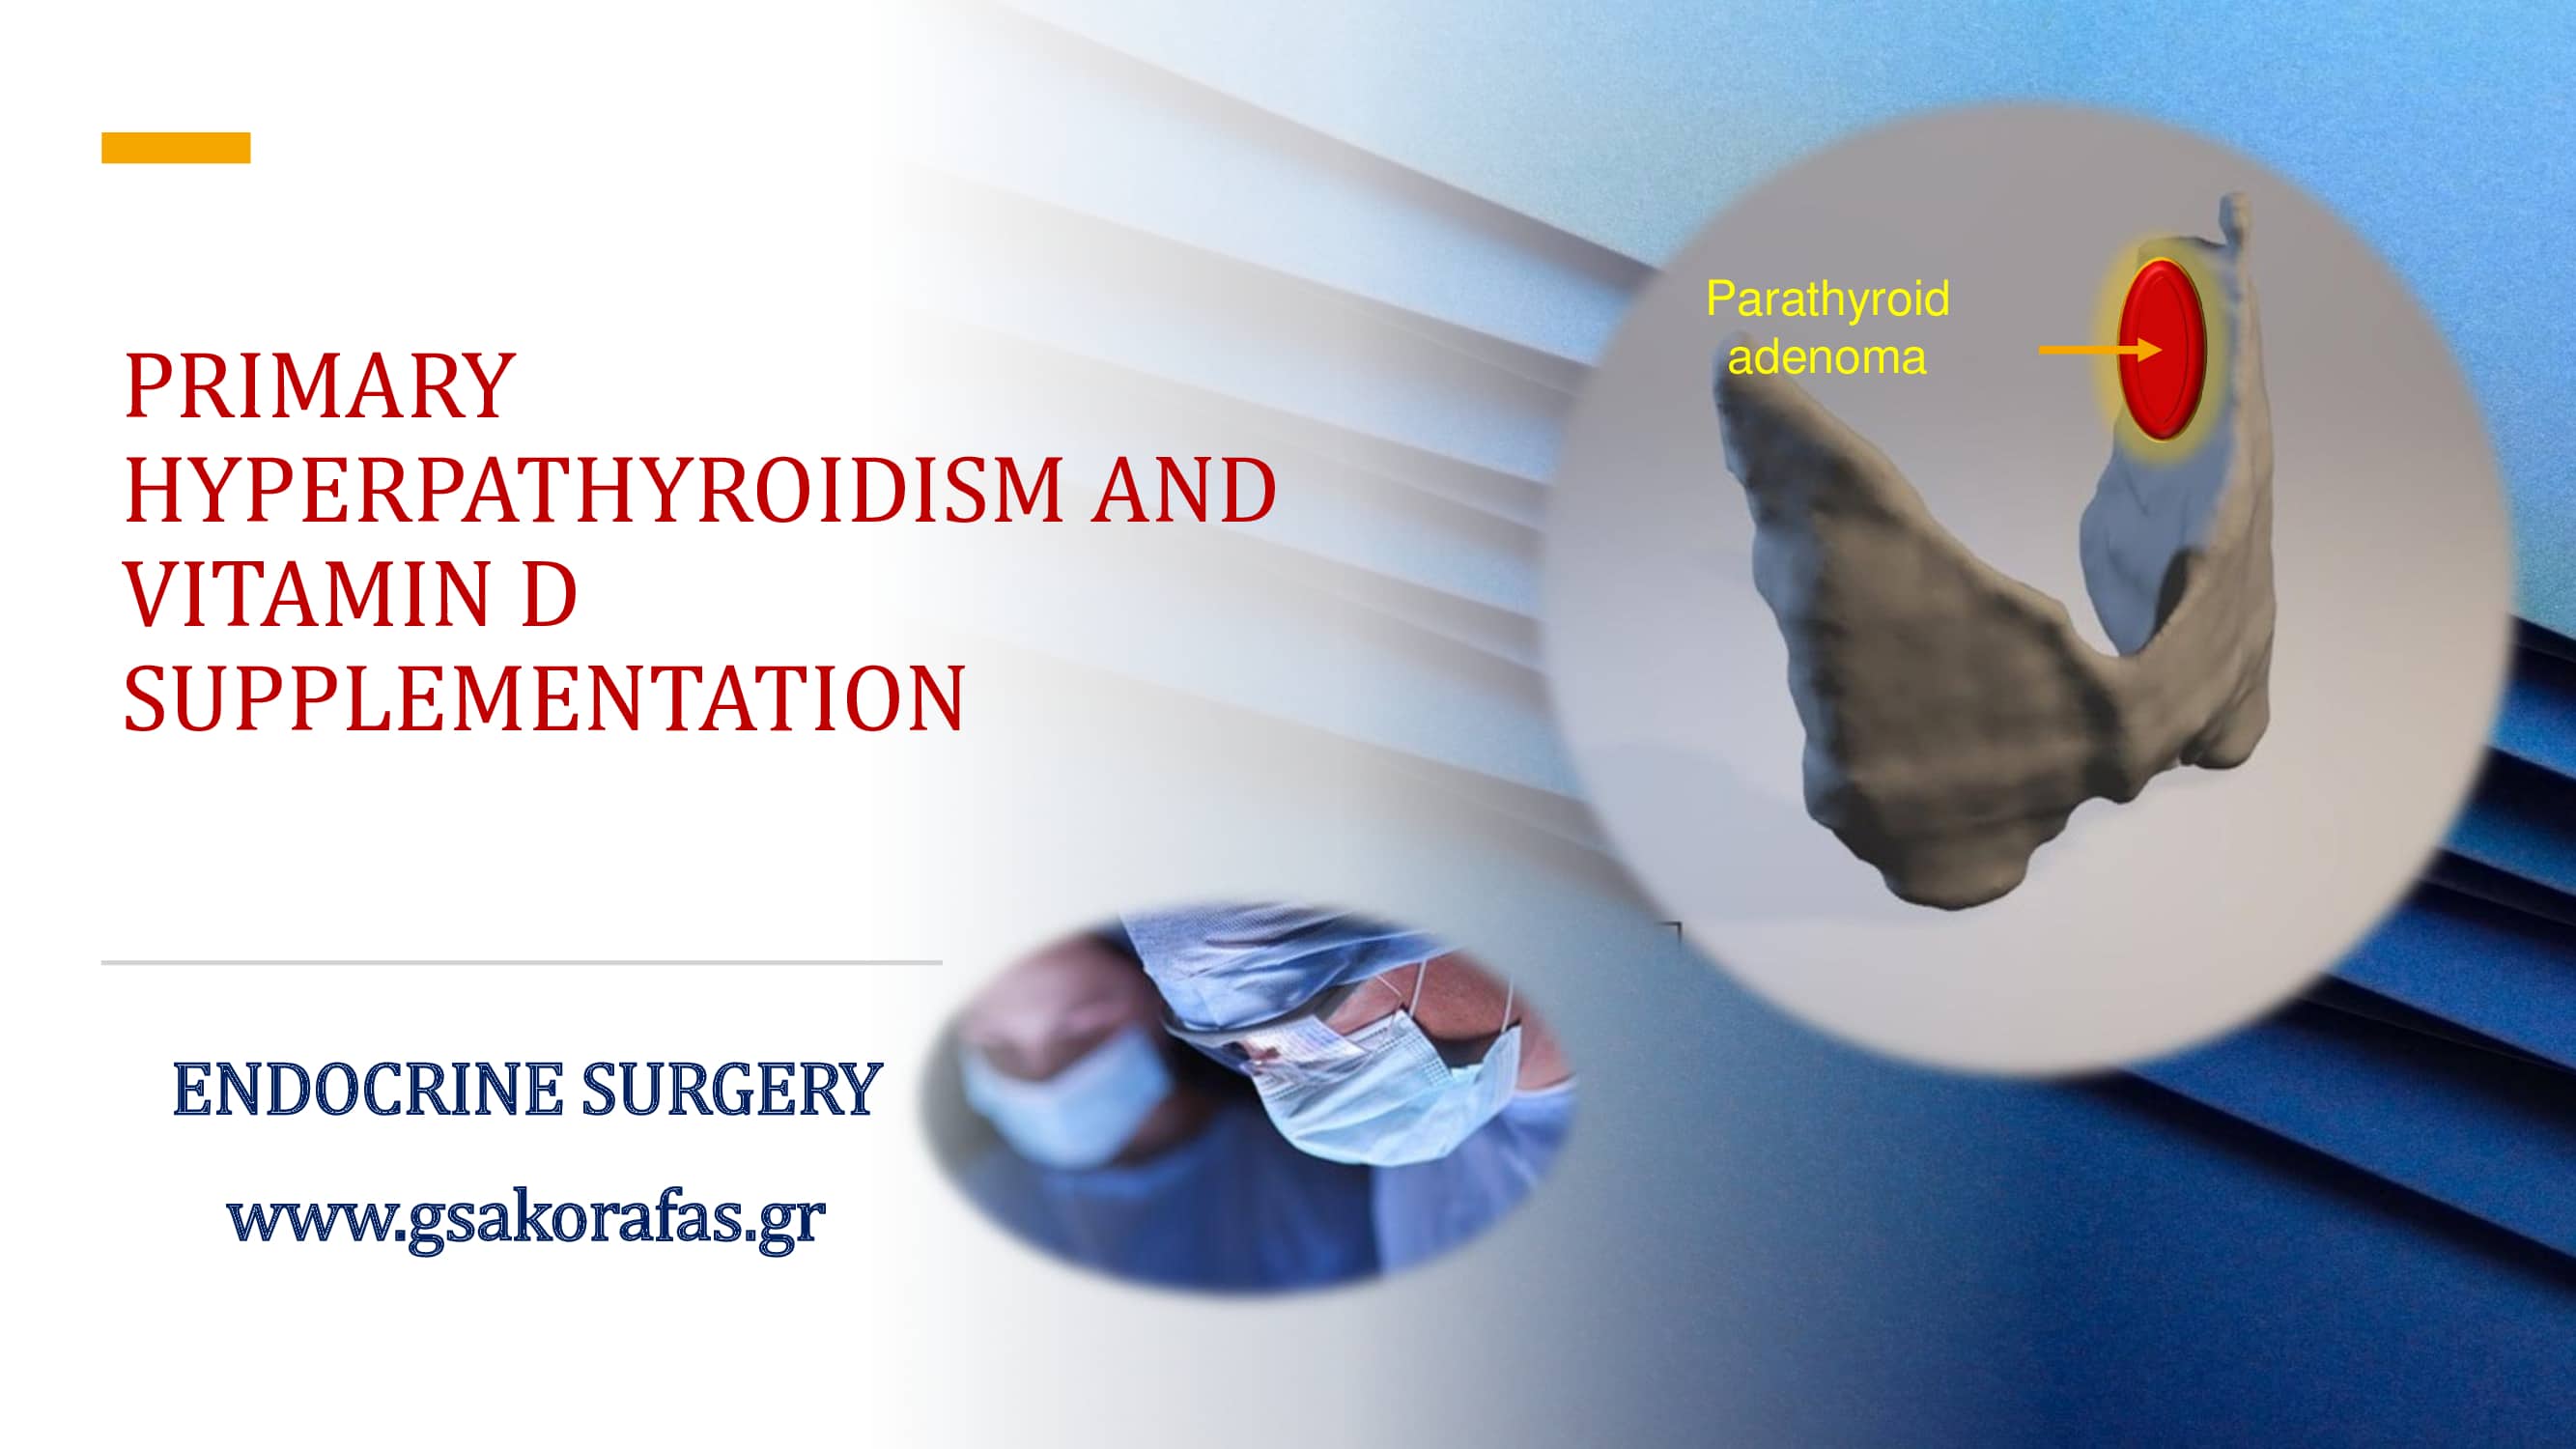 Primary hyperparathyroidism – is vitamin D supplementation indicated?